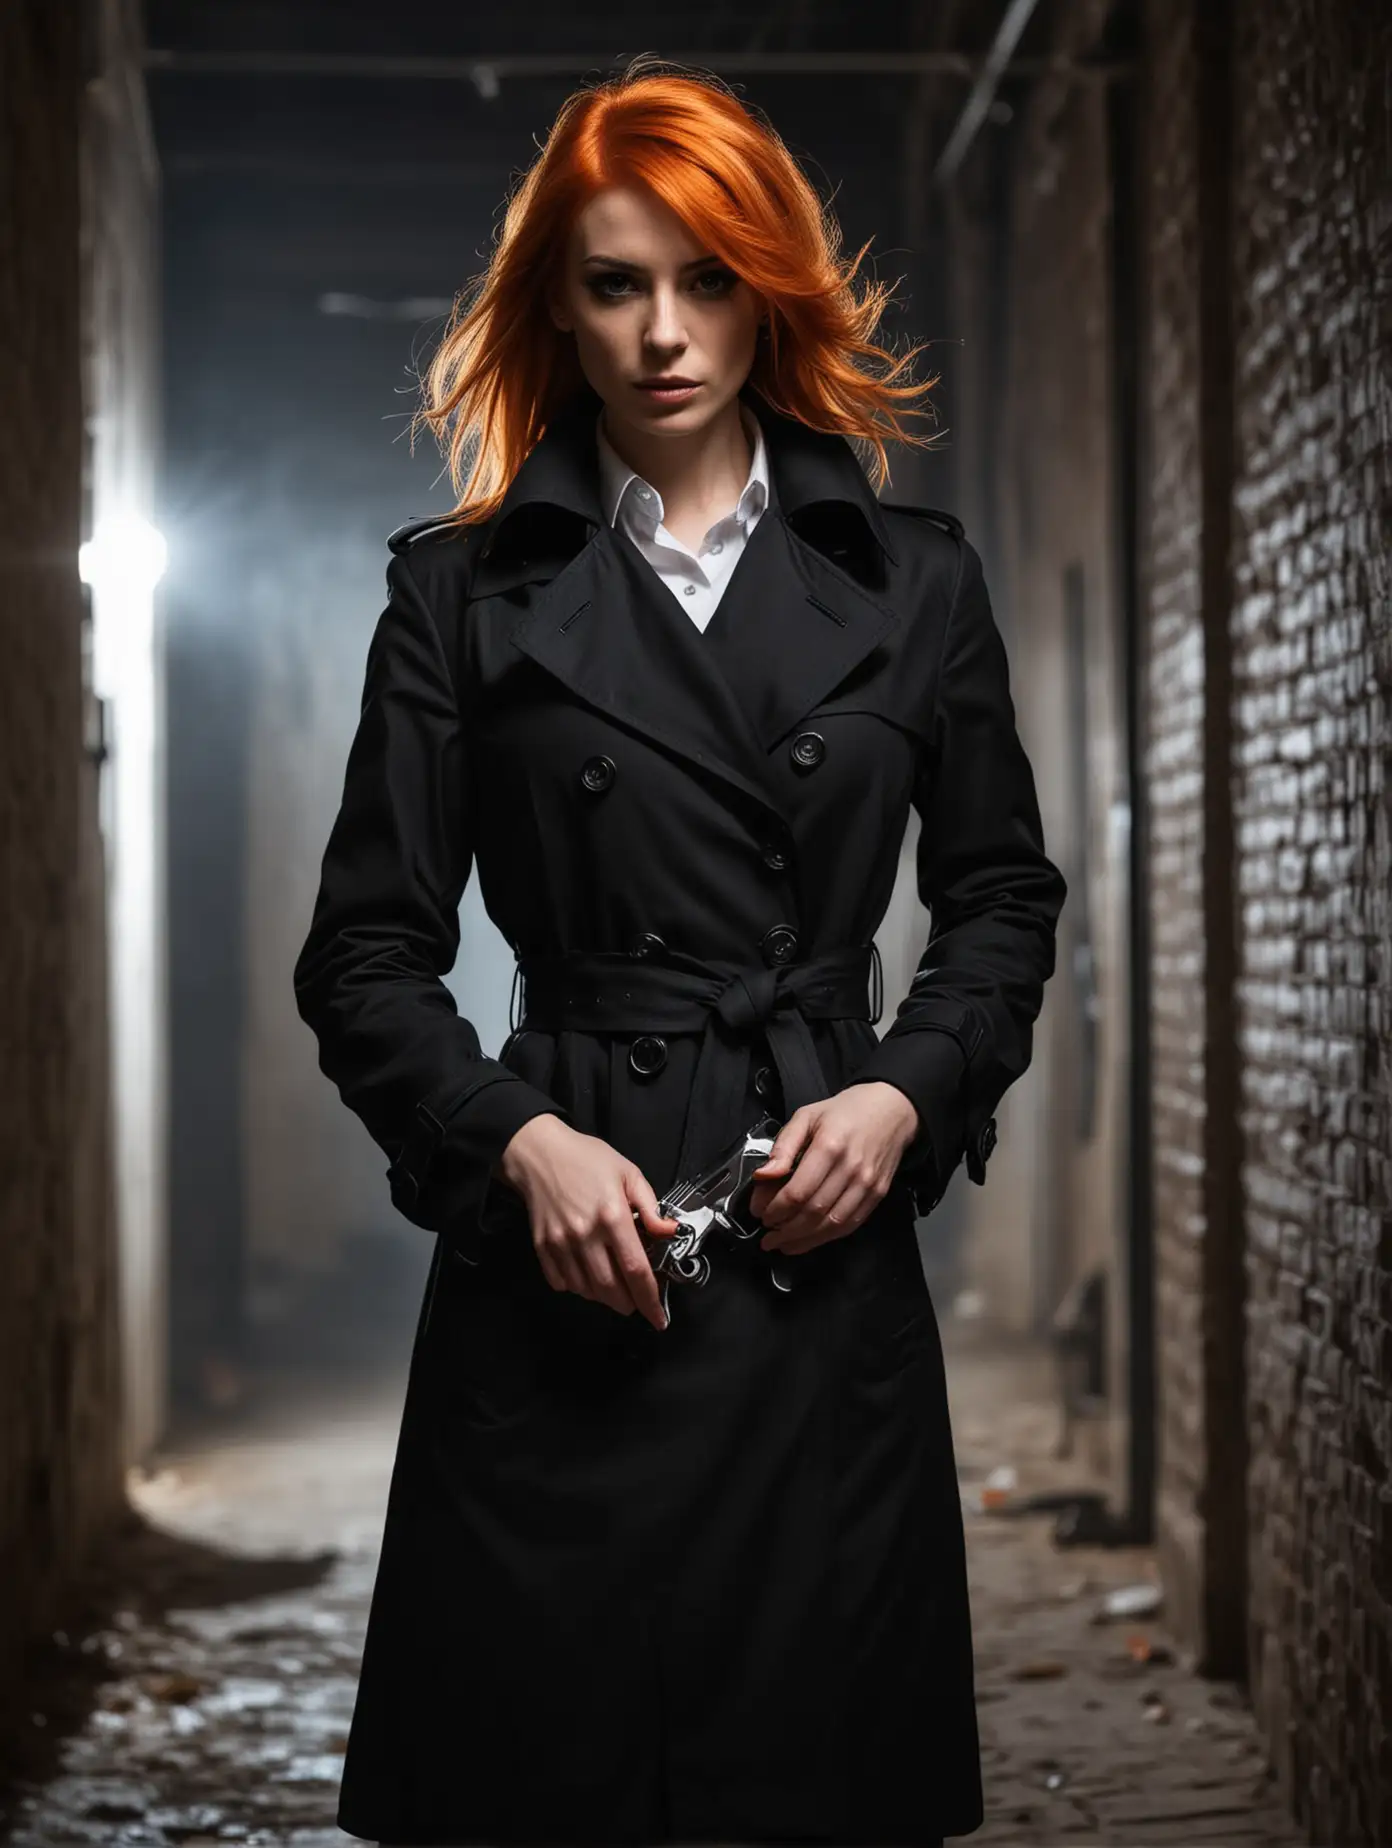 secret agent woman wearing black trench coat with orange hair lurking in the shadows with hand gun